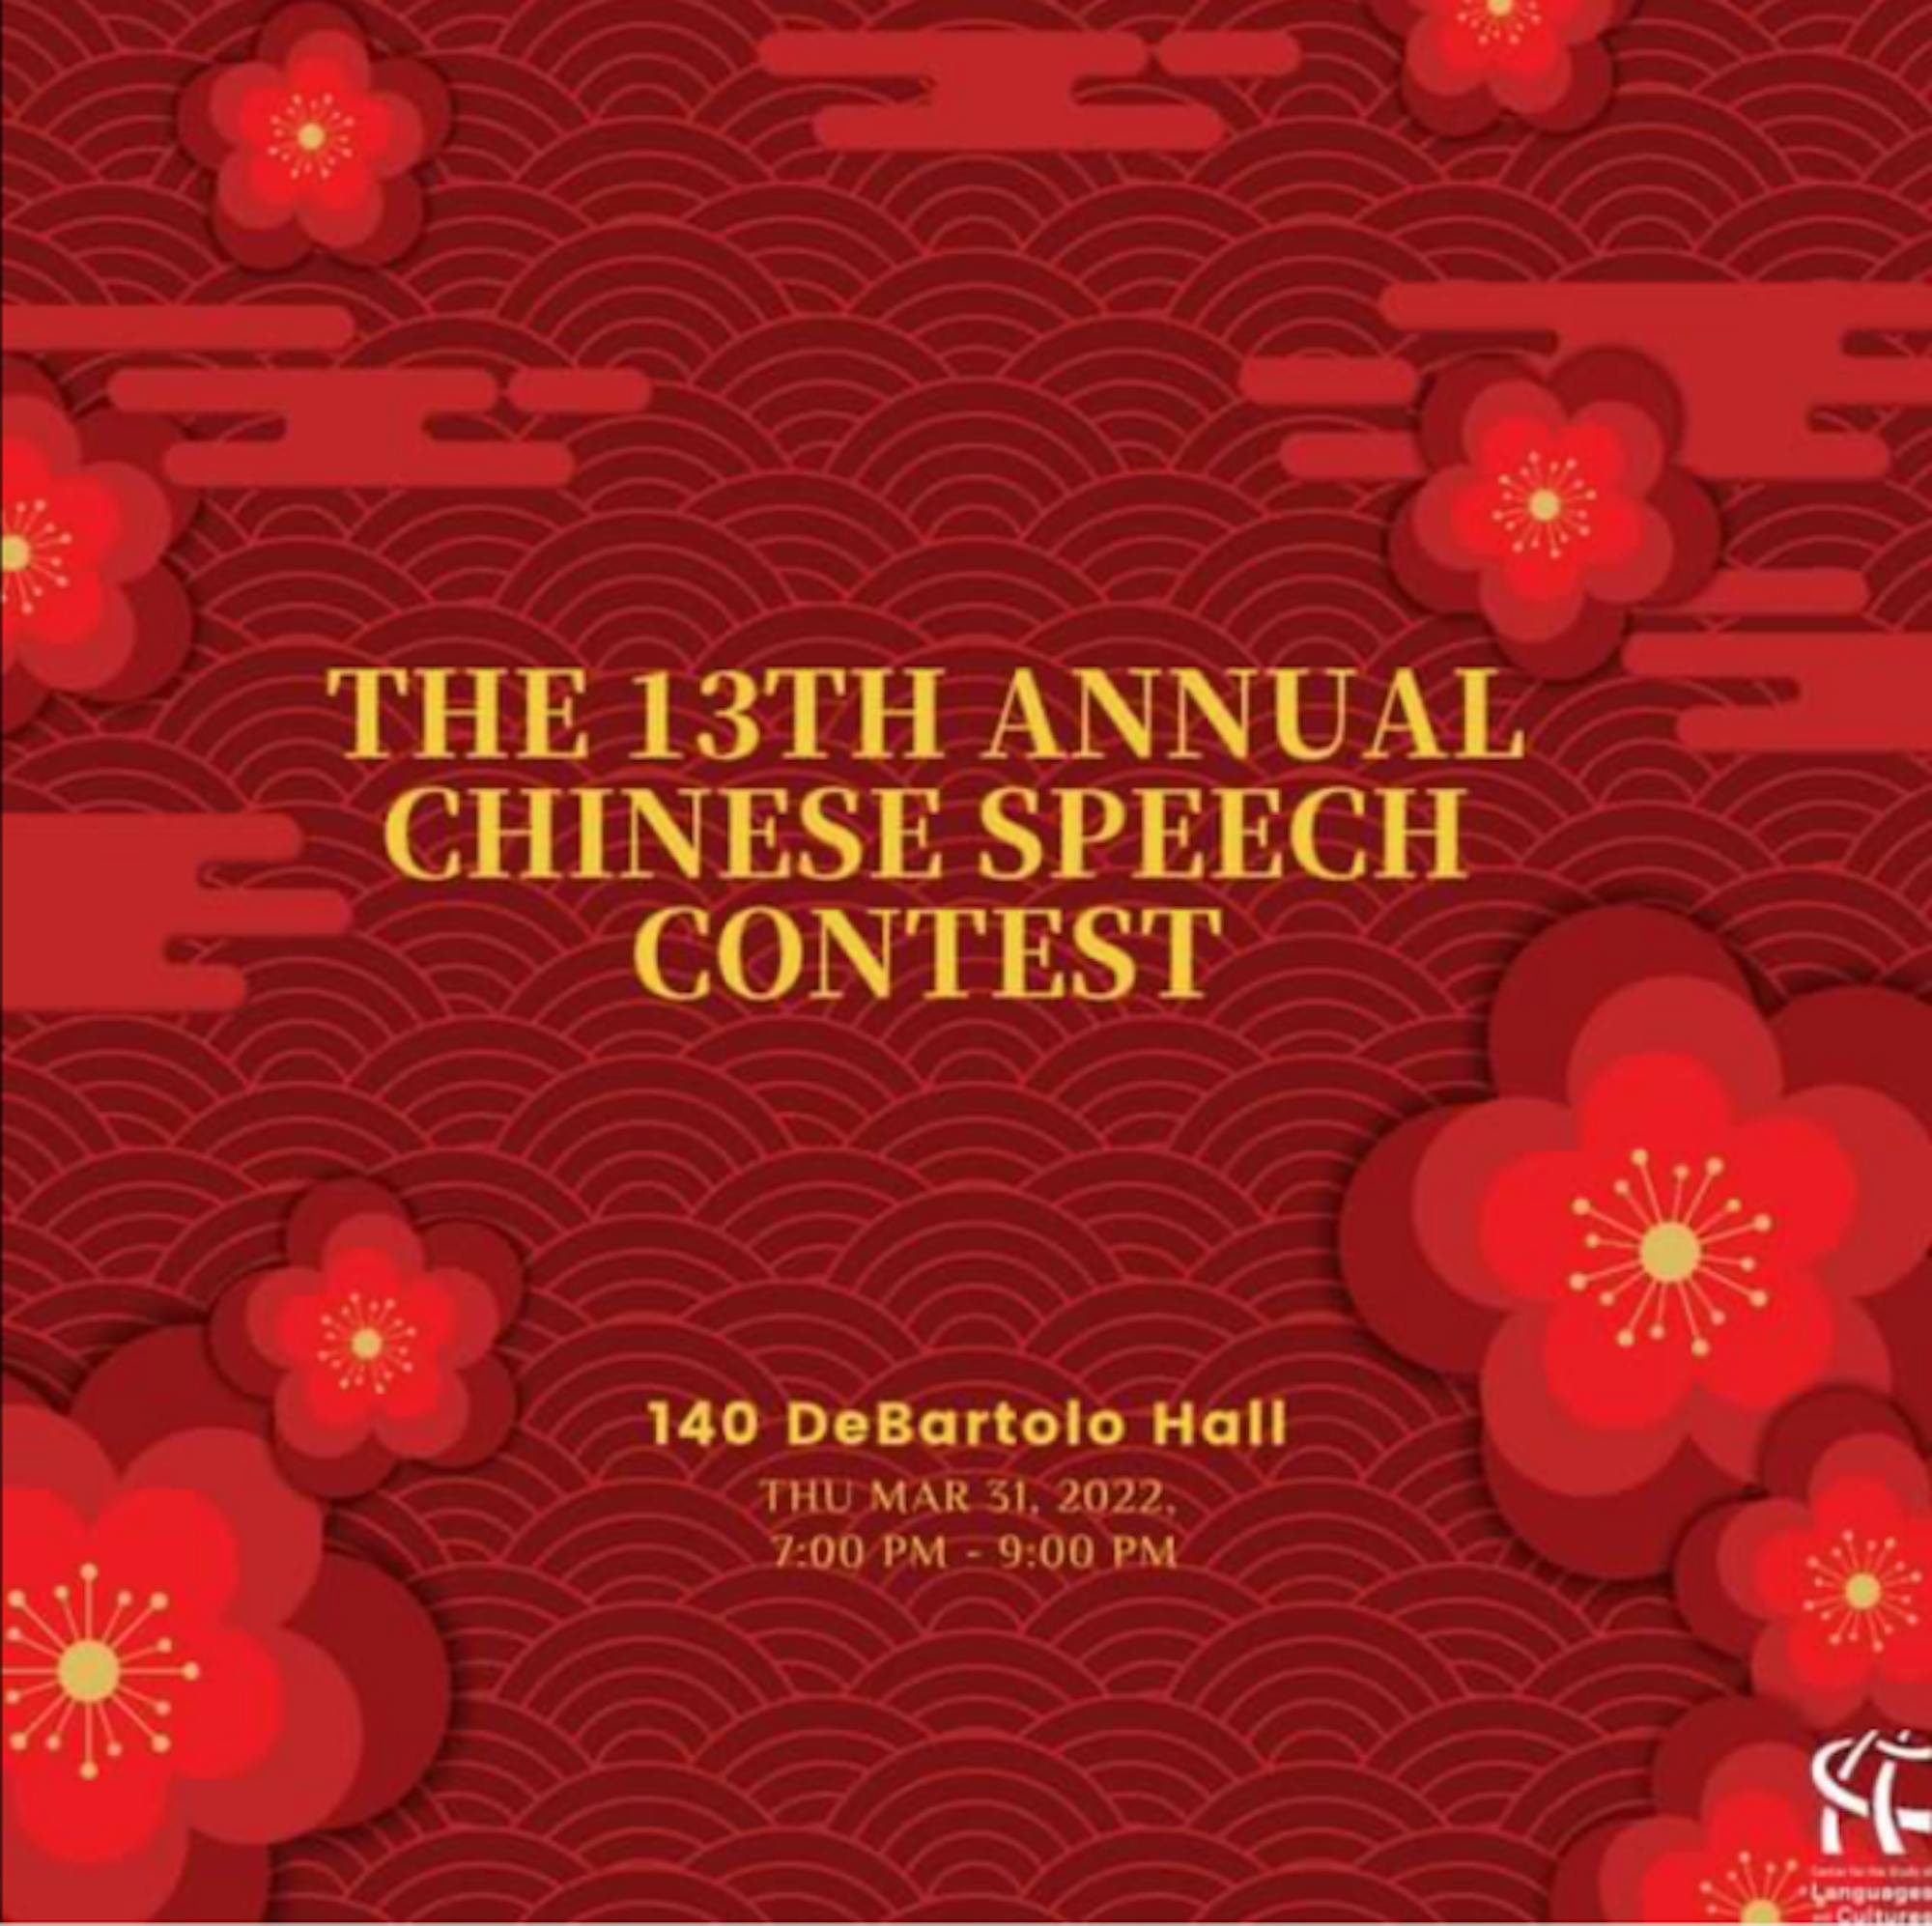 The 13th annual Chinese speech contest will be held this week.